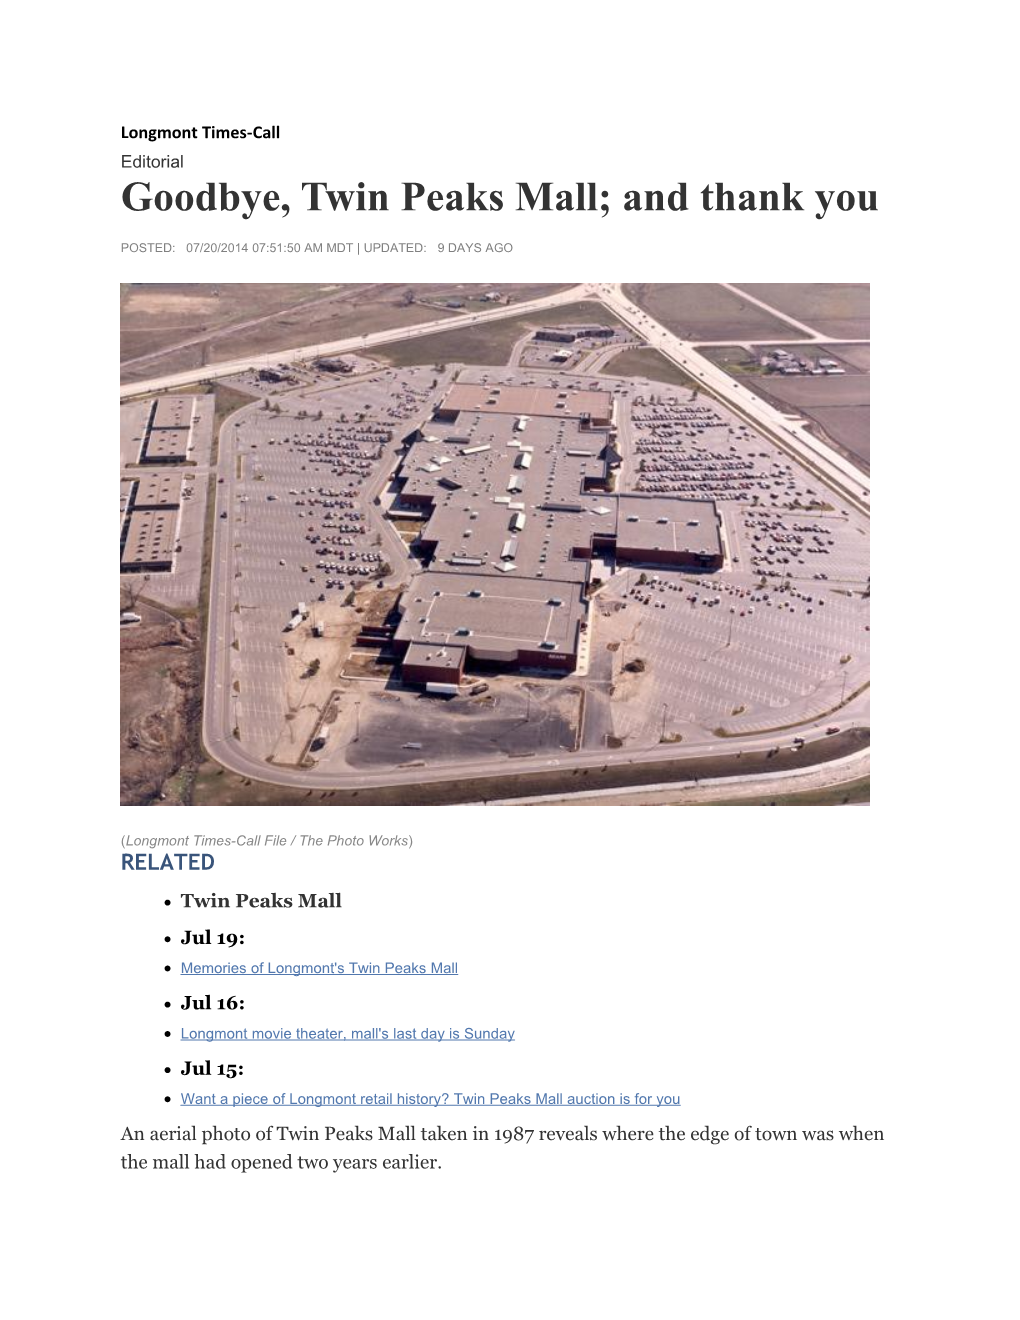 Goodbye, Twin Peaks Mall; and Thank You